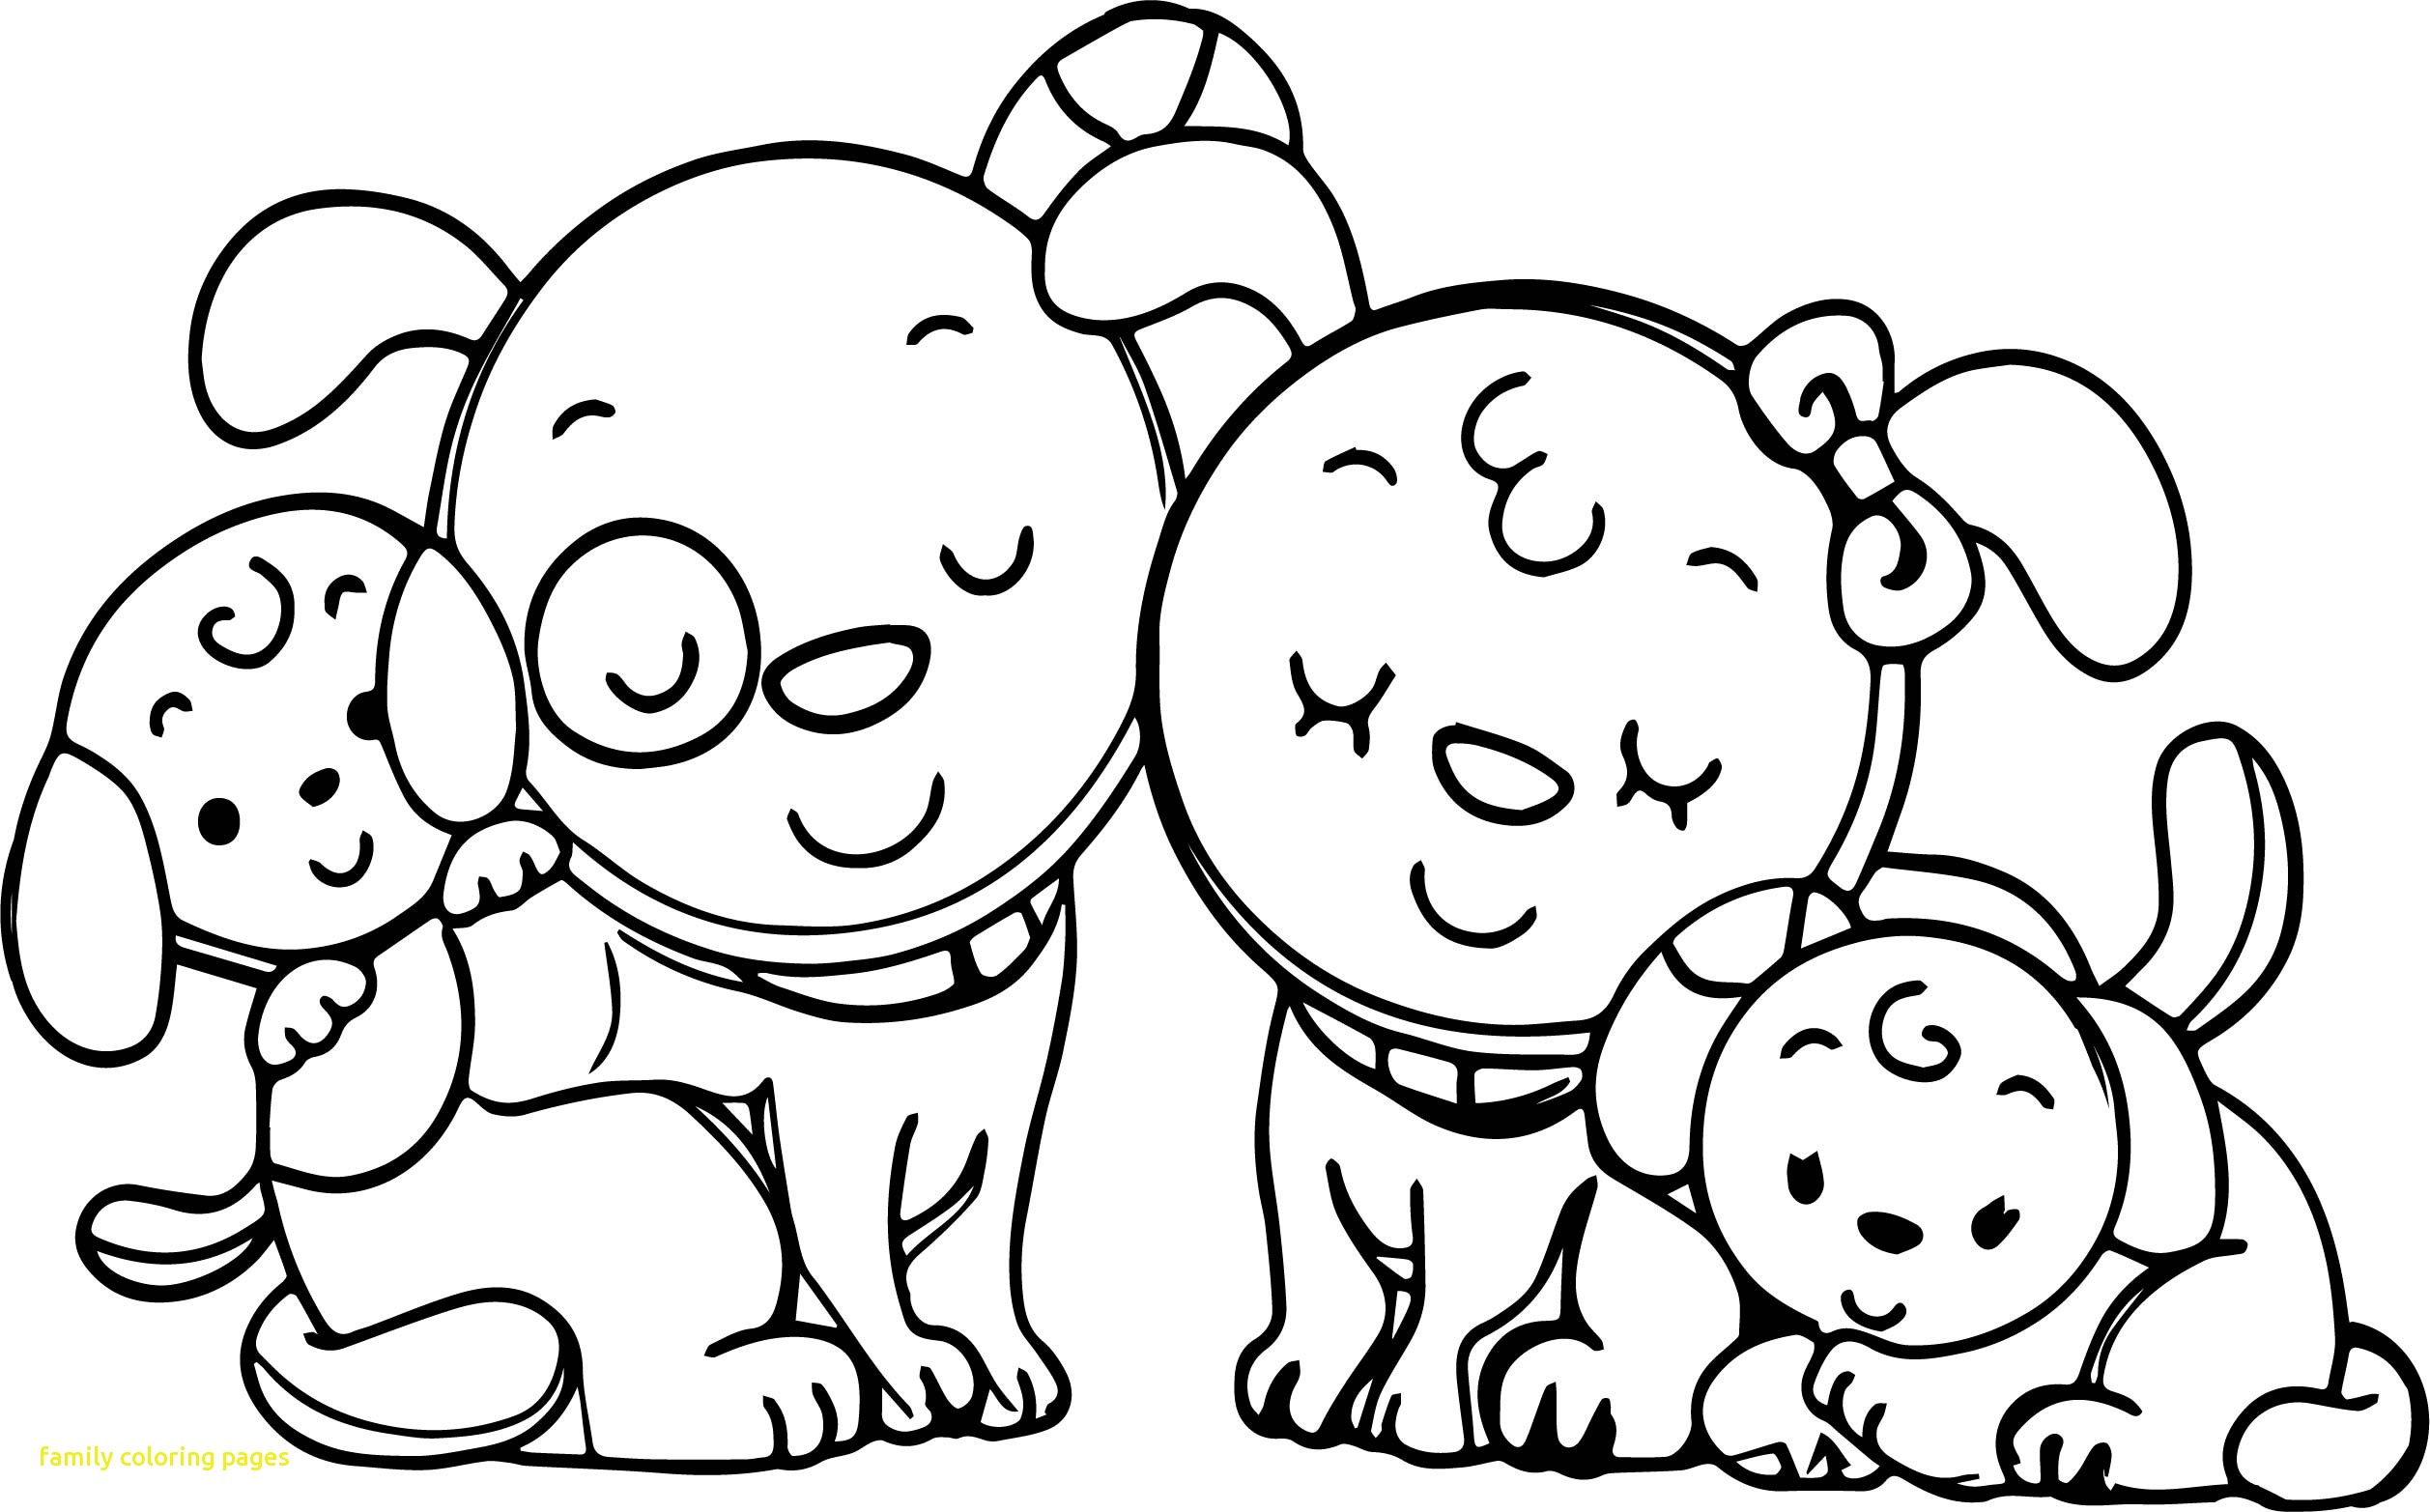 Family Coloring Pages For Preschoolers At GetColorings Free 